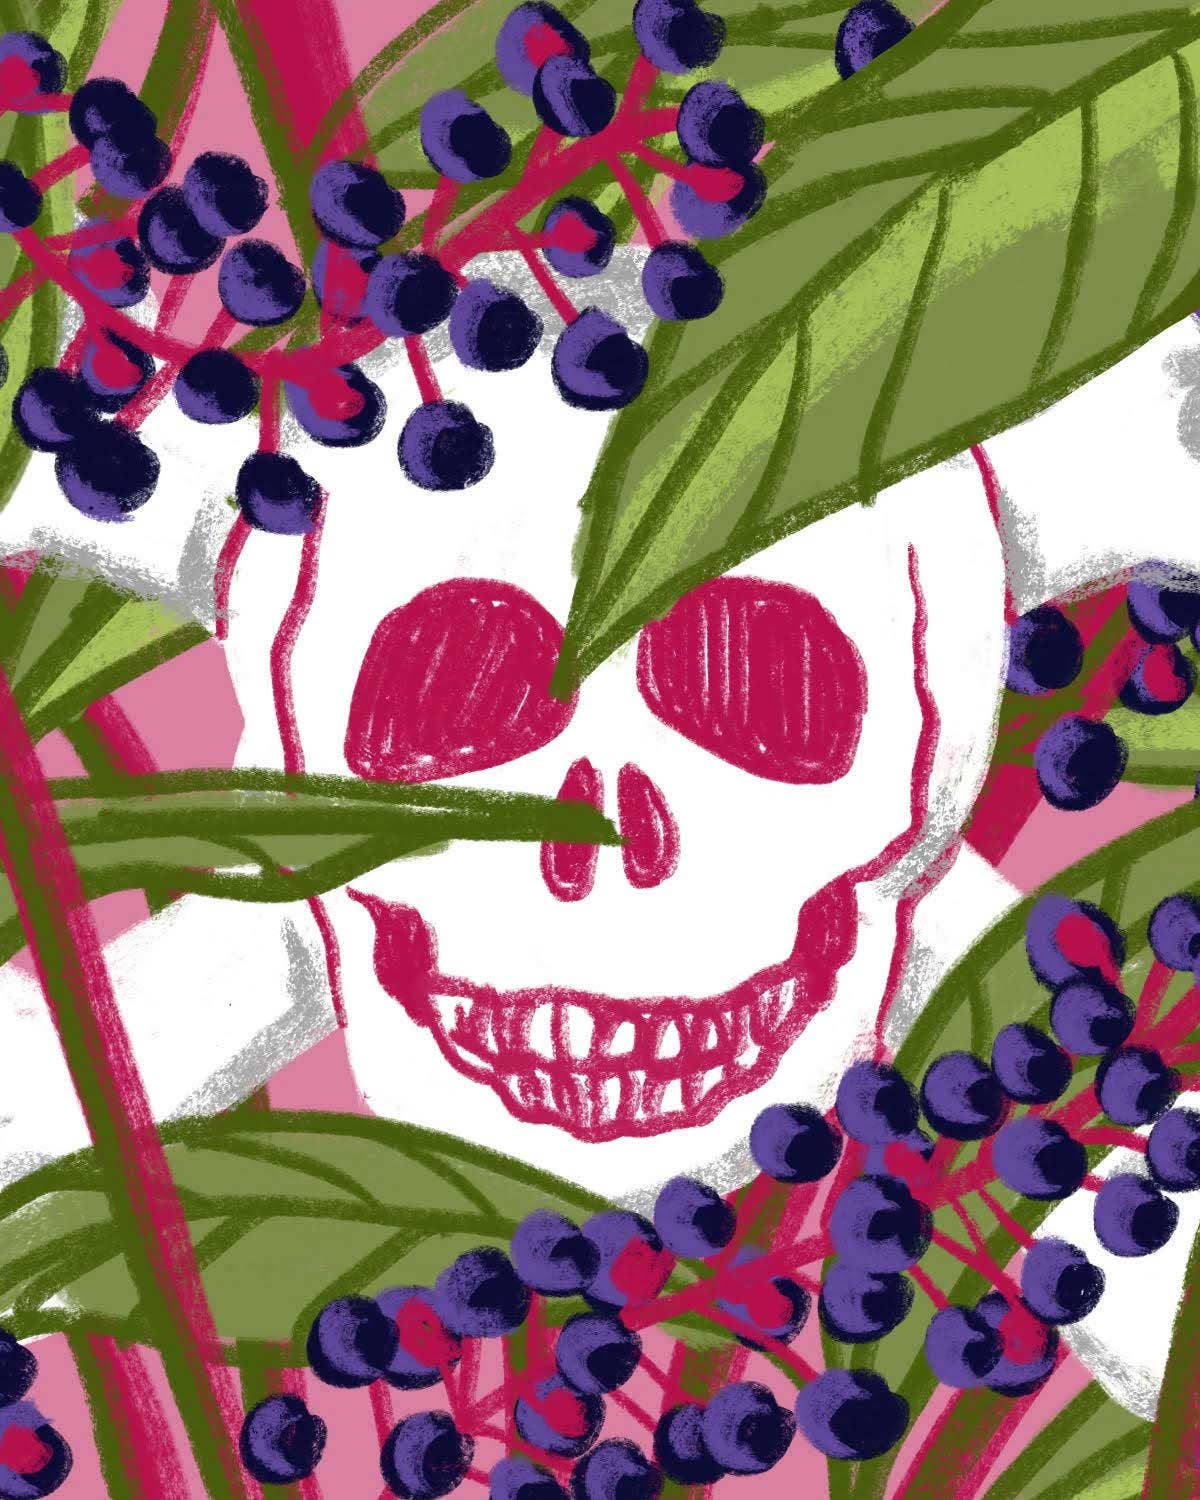 How Did This Poisonous Plant Become One of the American South’s Most Long-Standing Staples?